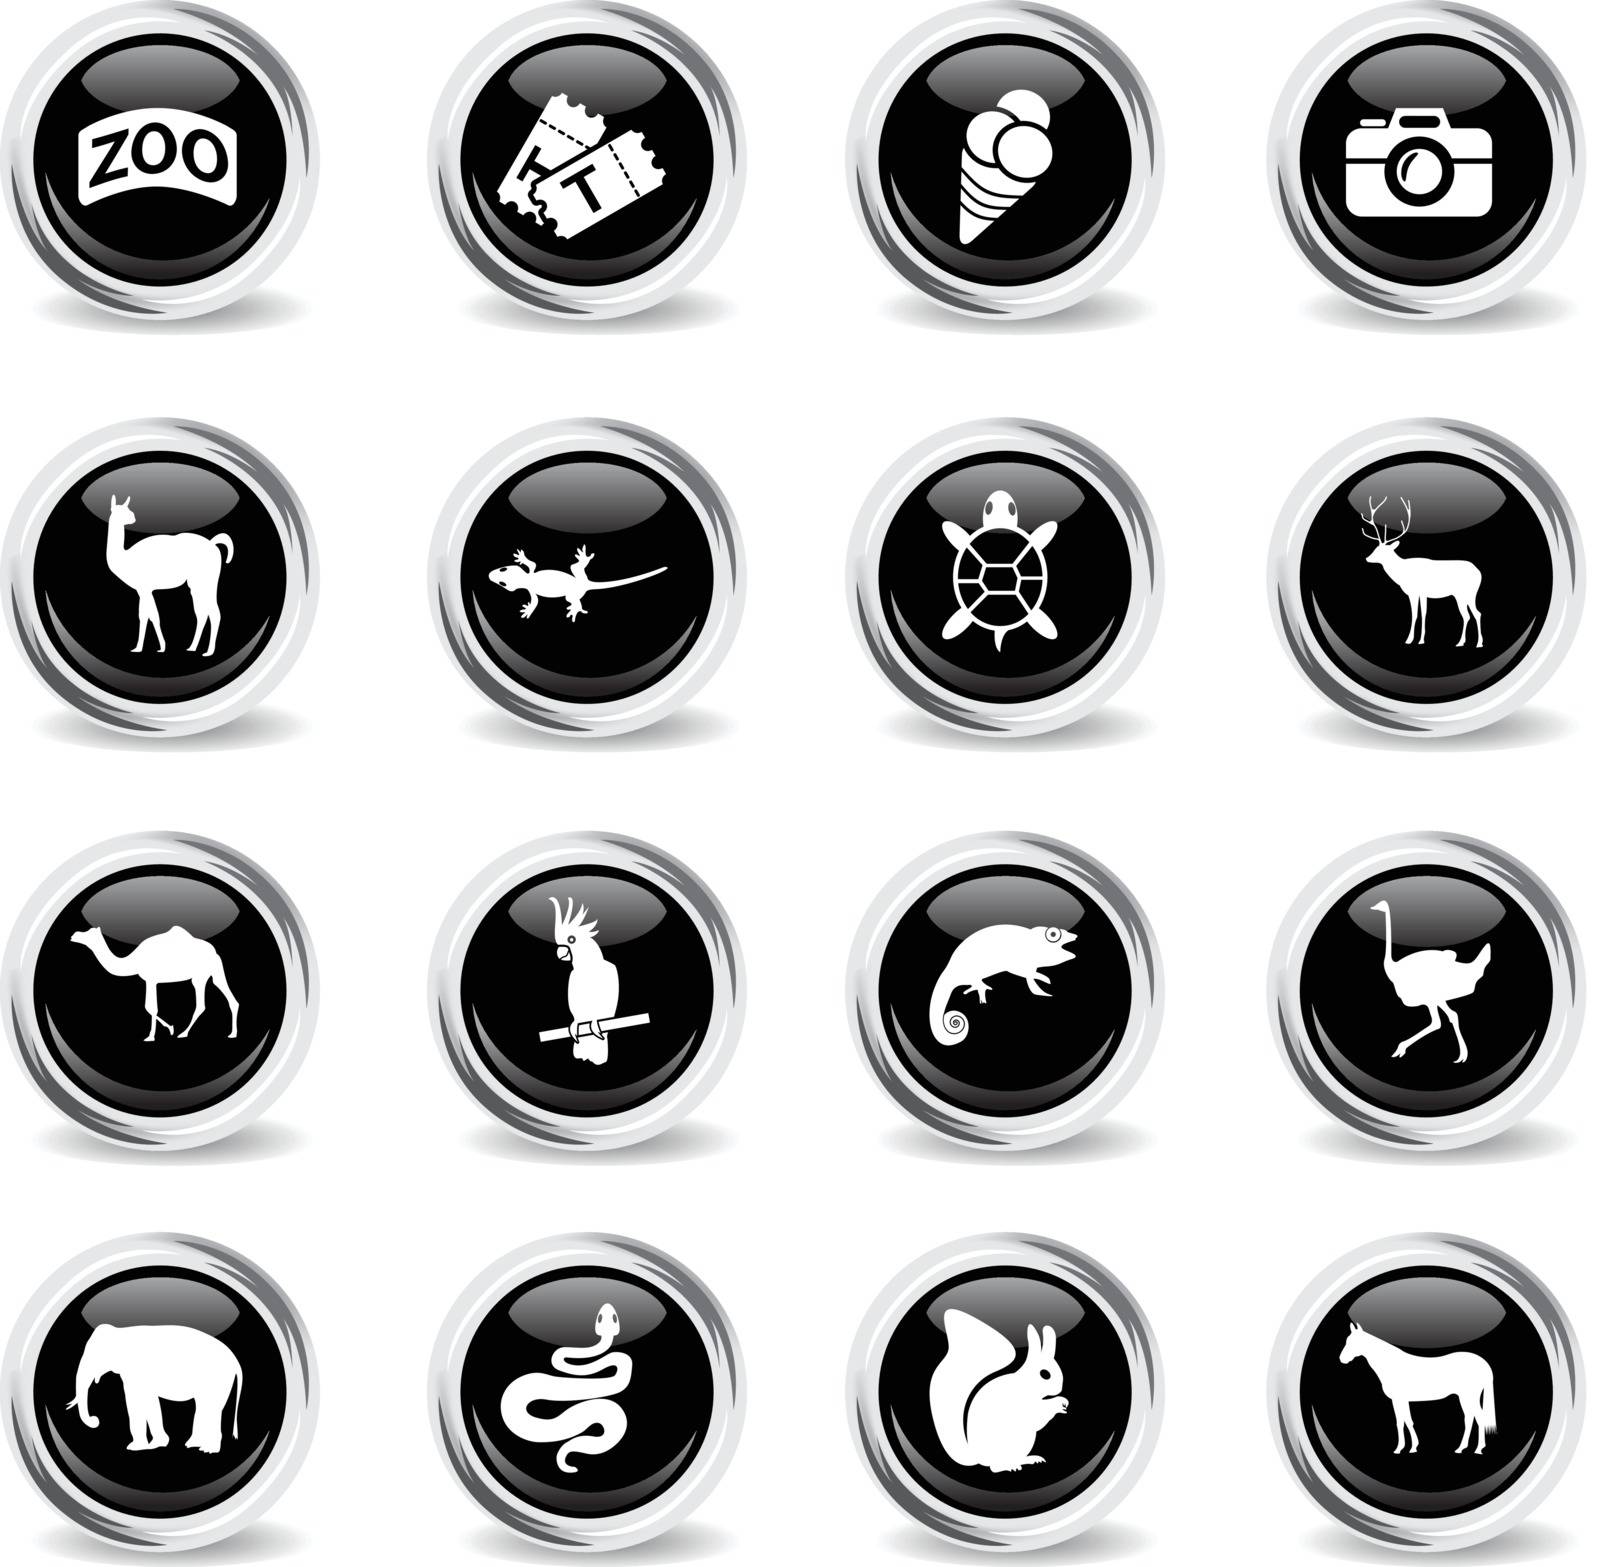 zoo web icons - black round chrome buttons